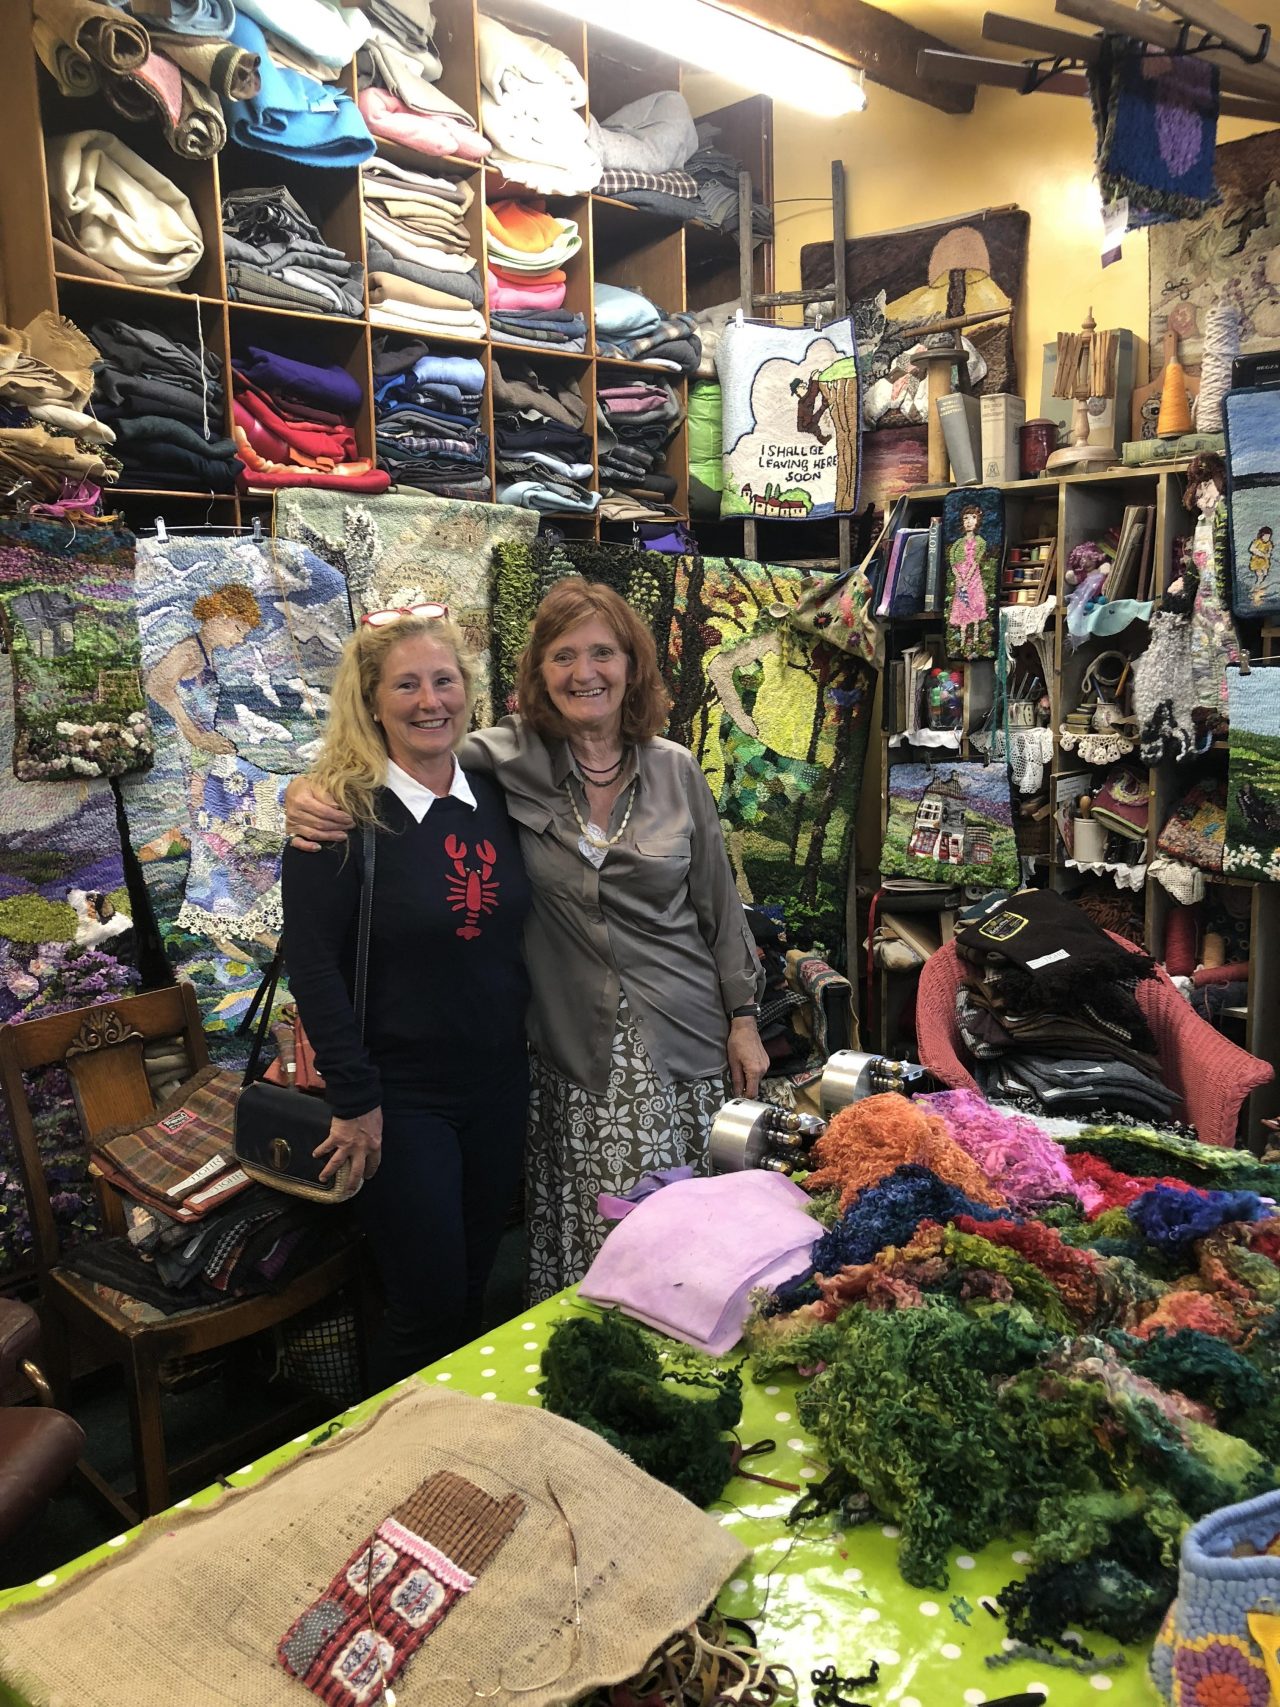 Yvonne Iten-Scott with rug maker Heather Ritchie in Heathers studio packed with fabrics.